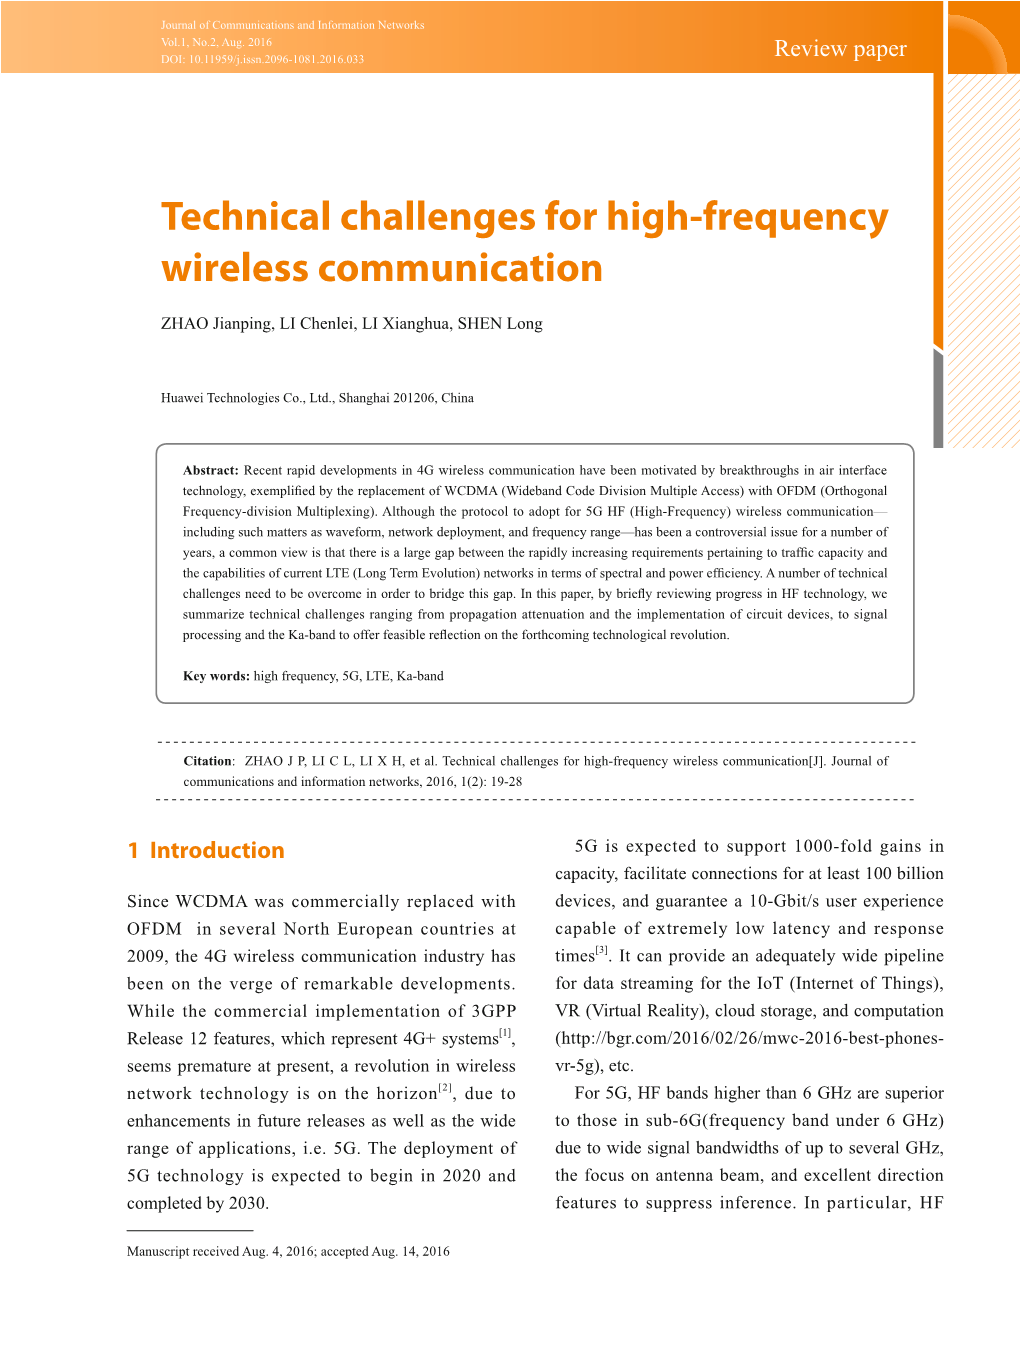 Technical Challenges for High-Frequency Wireless Communication Review Paper